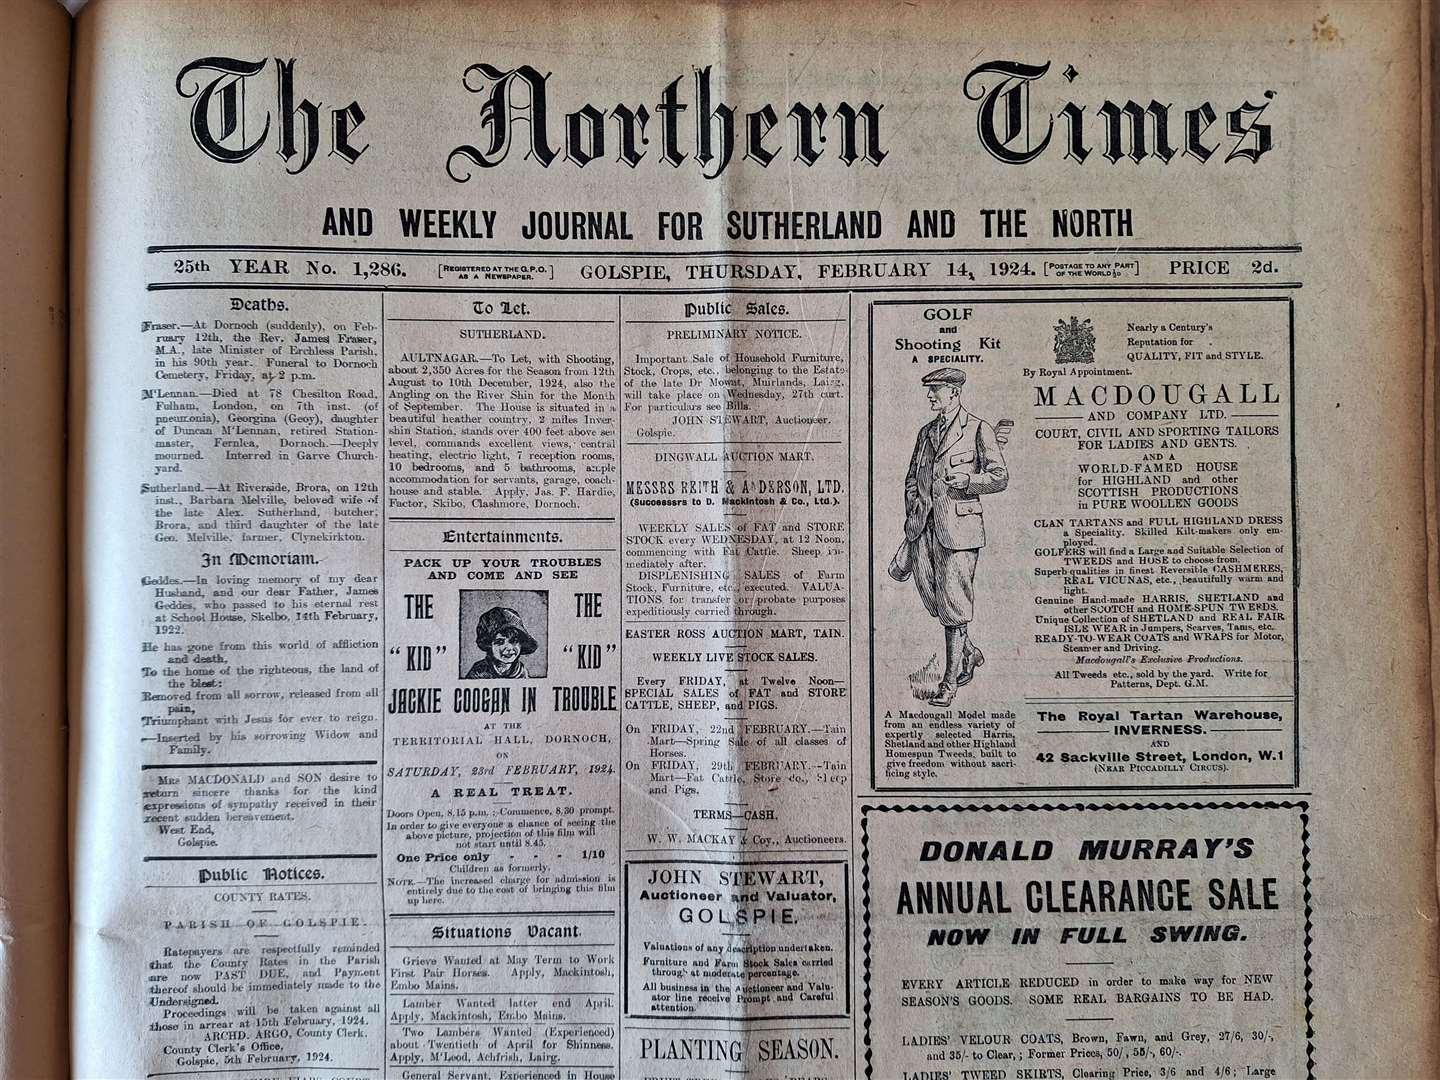 The edition of February 14, 1924.